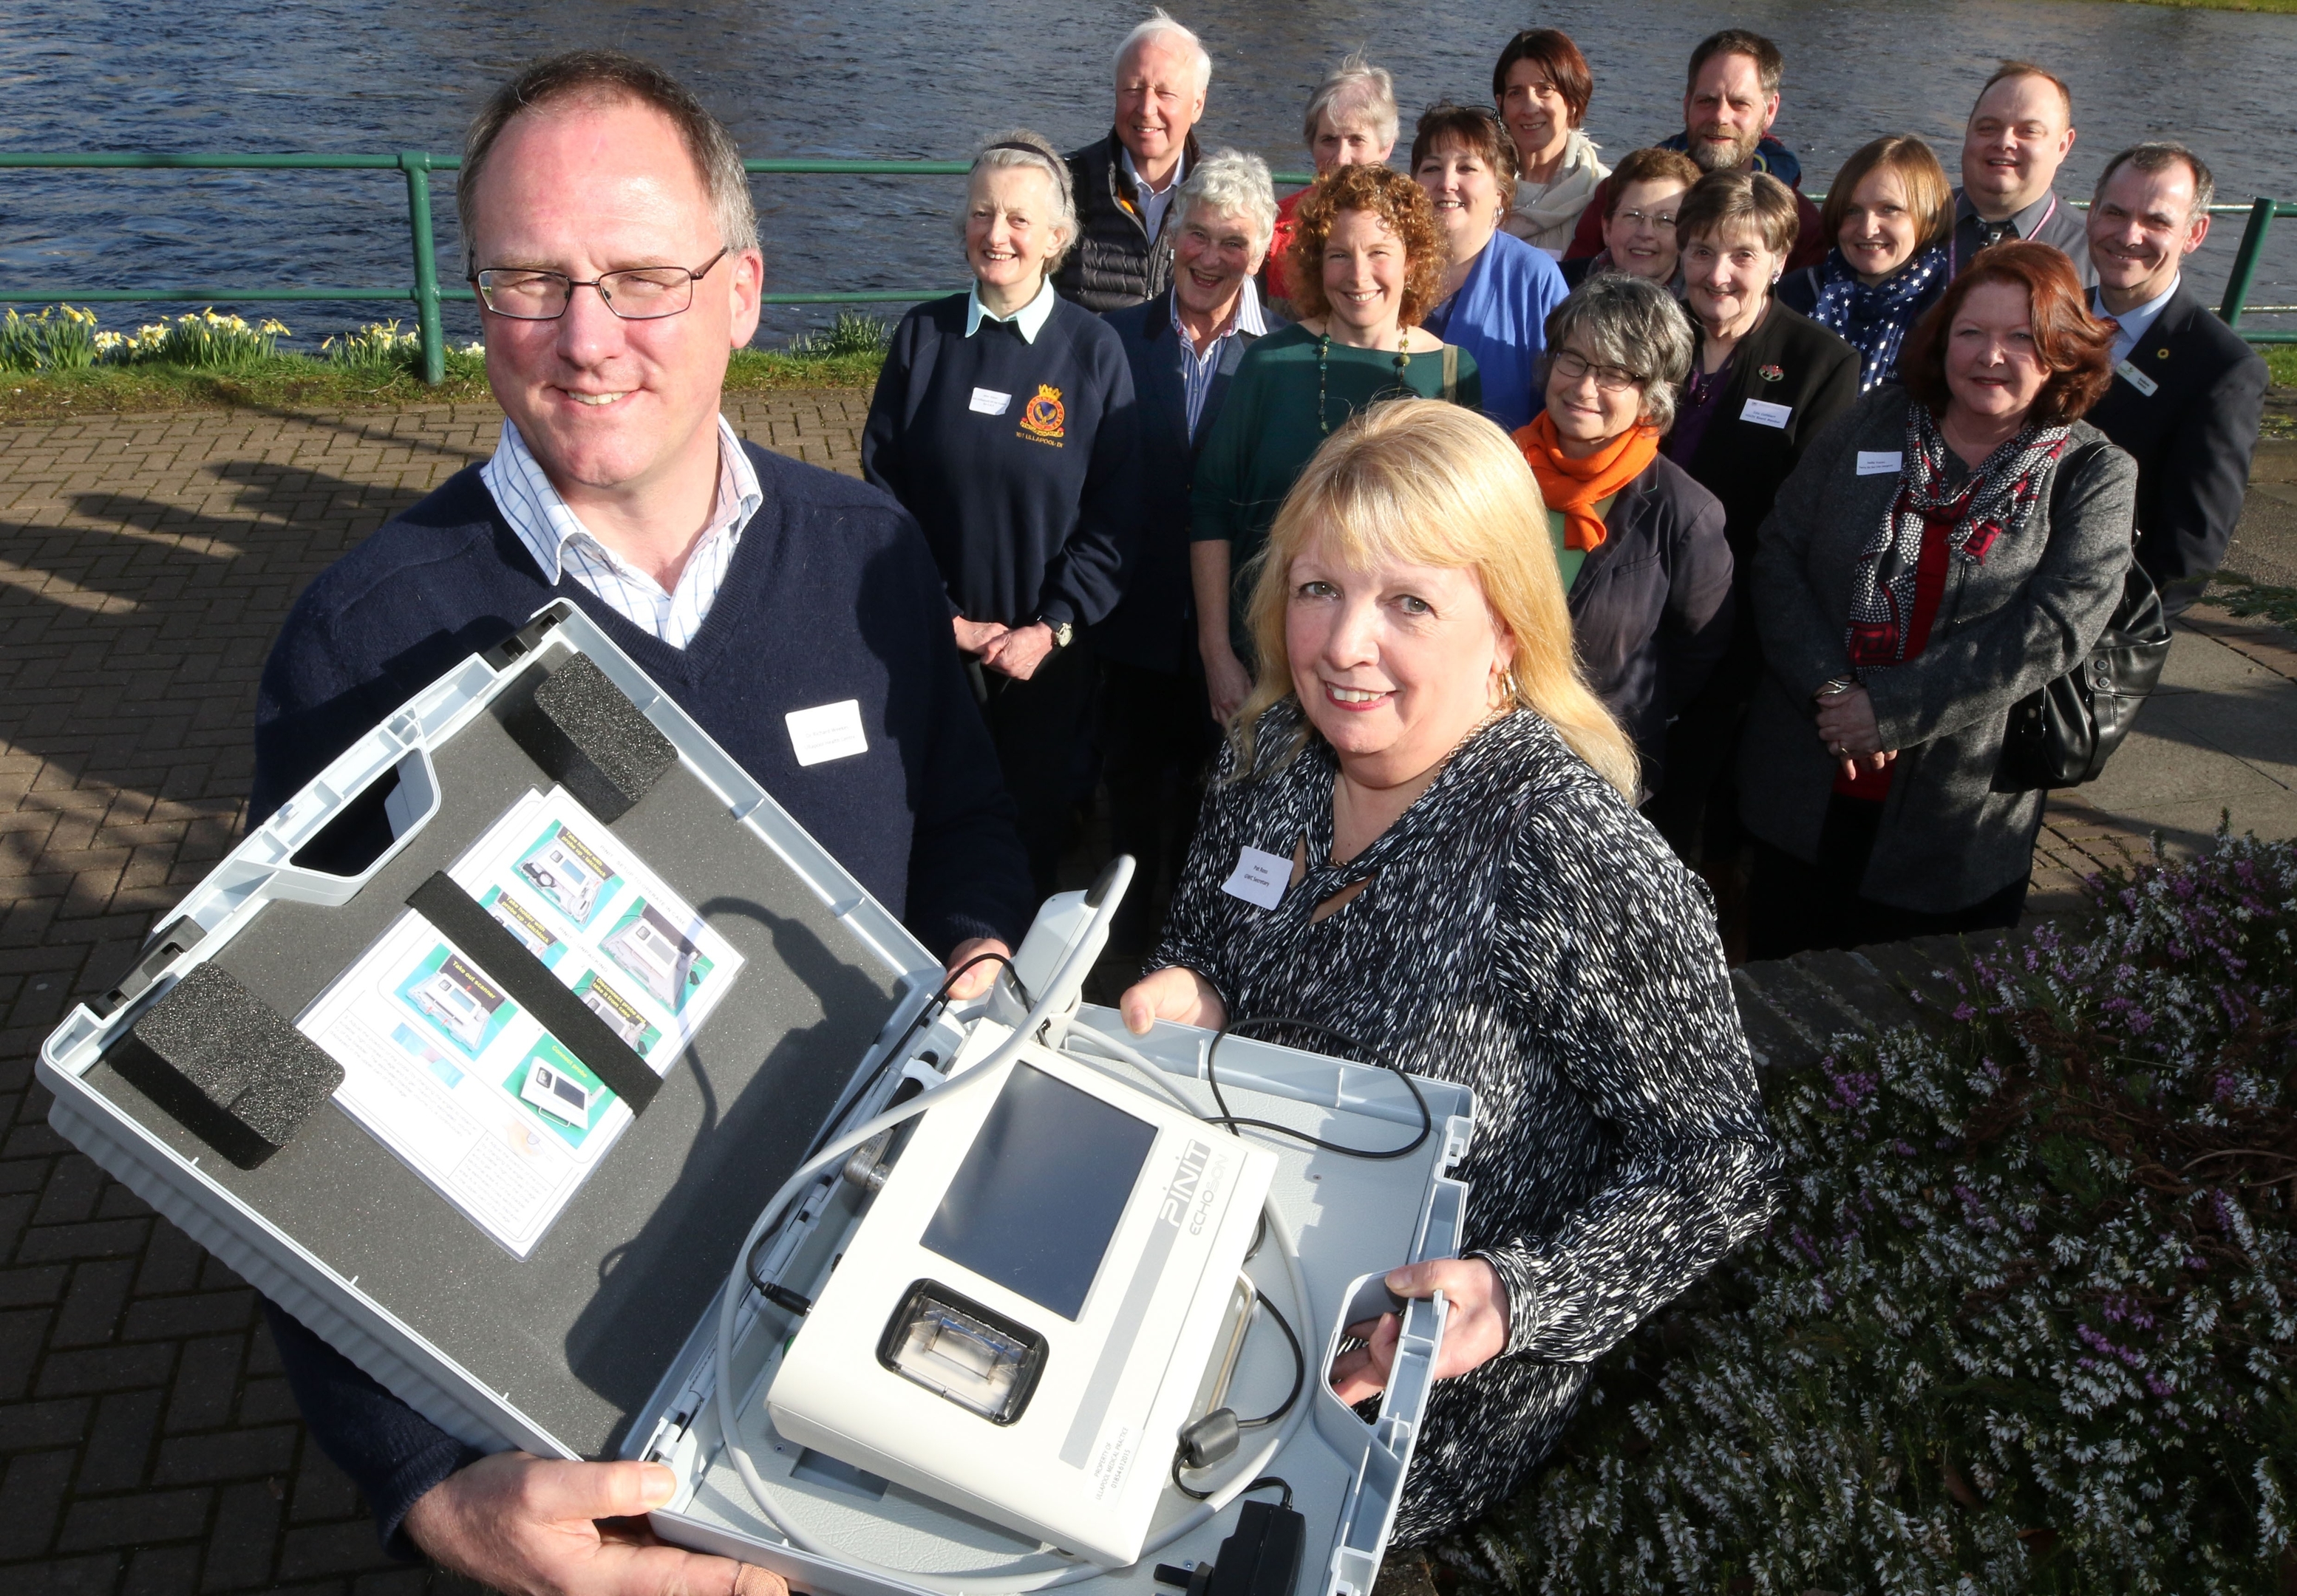 Representatives of the charities with, at the front, Ullapool Health Centre GP Richard Weekes and Great Wilderness Challenge secretary Pat Ross, with a £6,000 ultrasound scanner donated to the health centre.